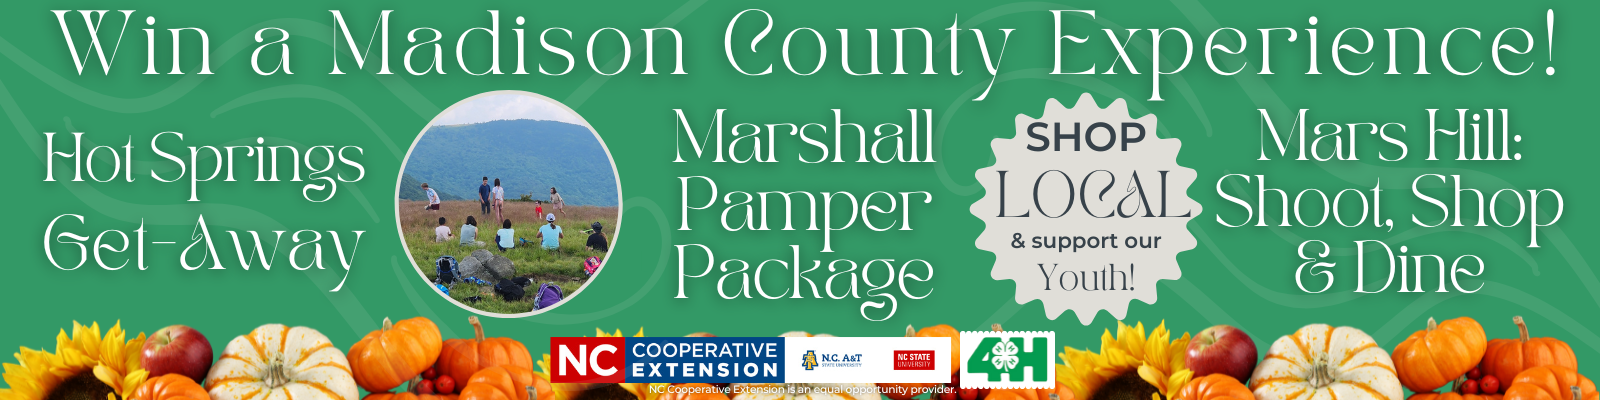 Win a Madison County Experience, Hot Springs Get-Away. Marshall Pamper Package. Mars Hills: Shoot, Shop & Dine